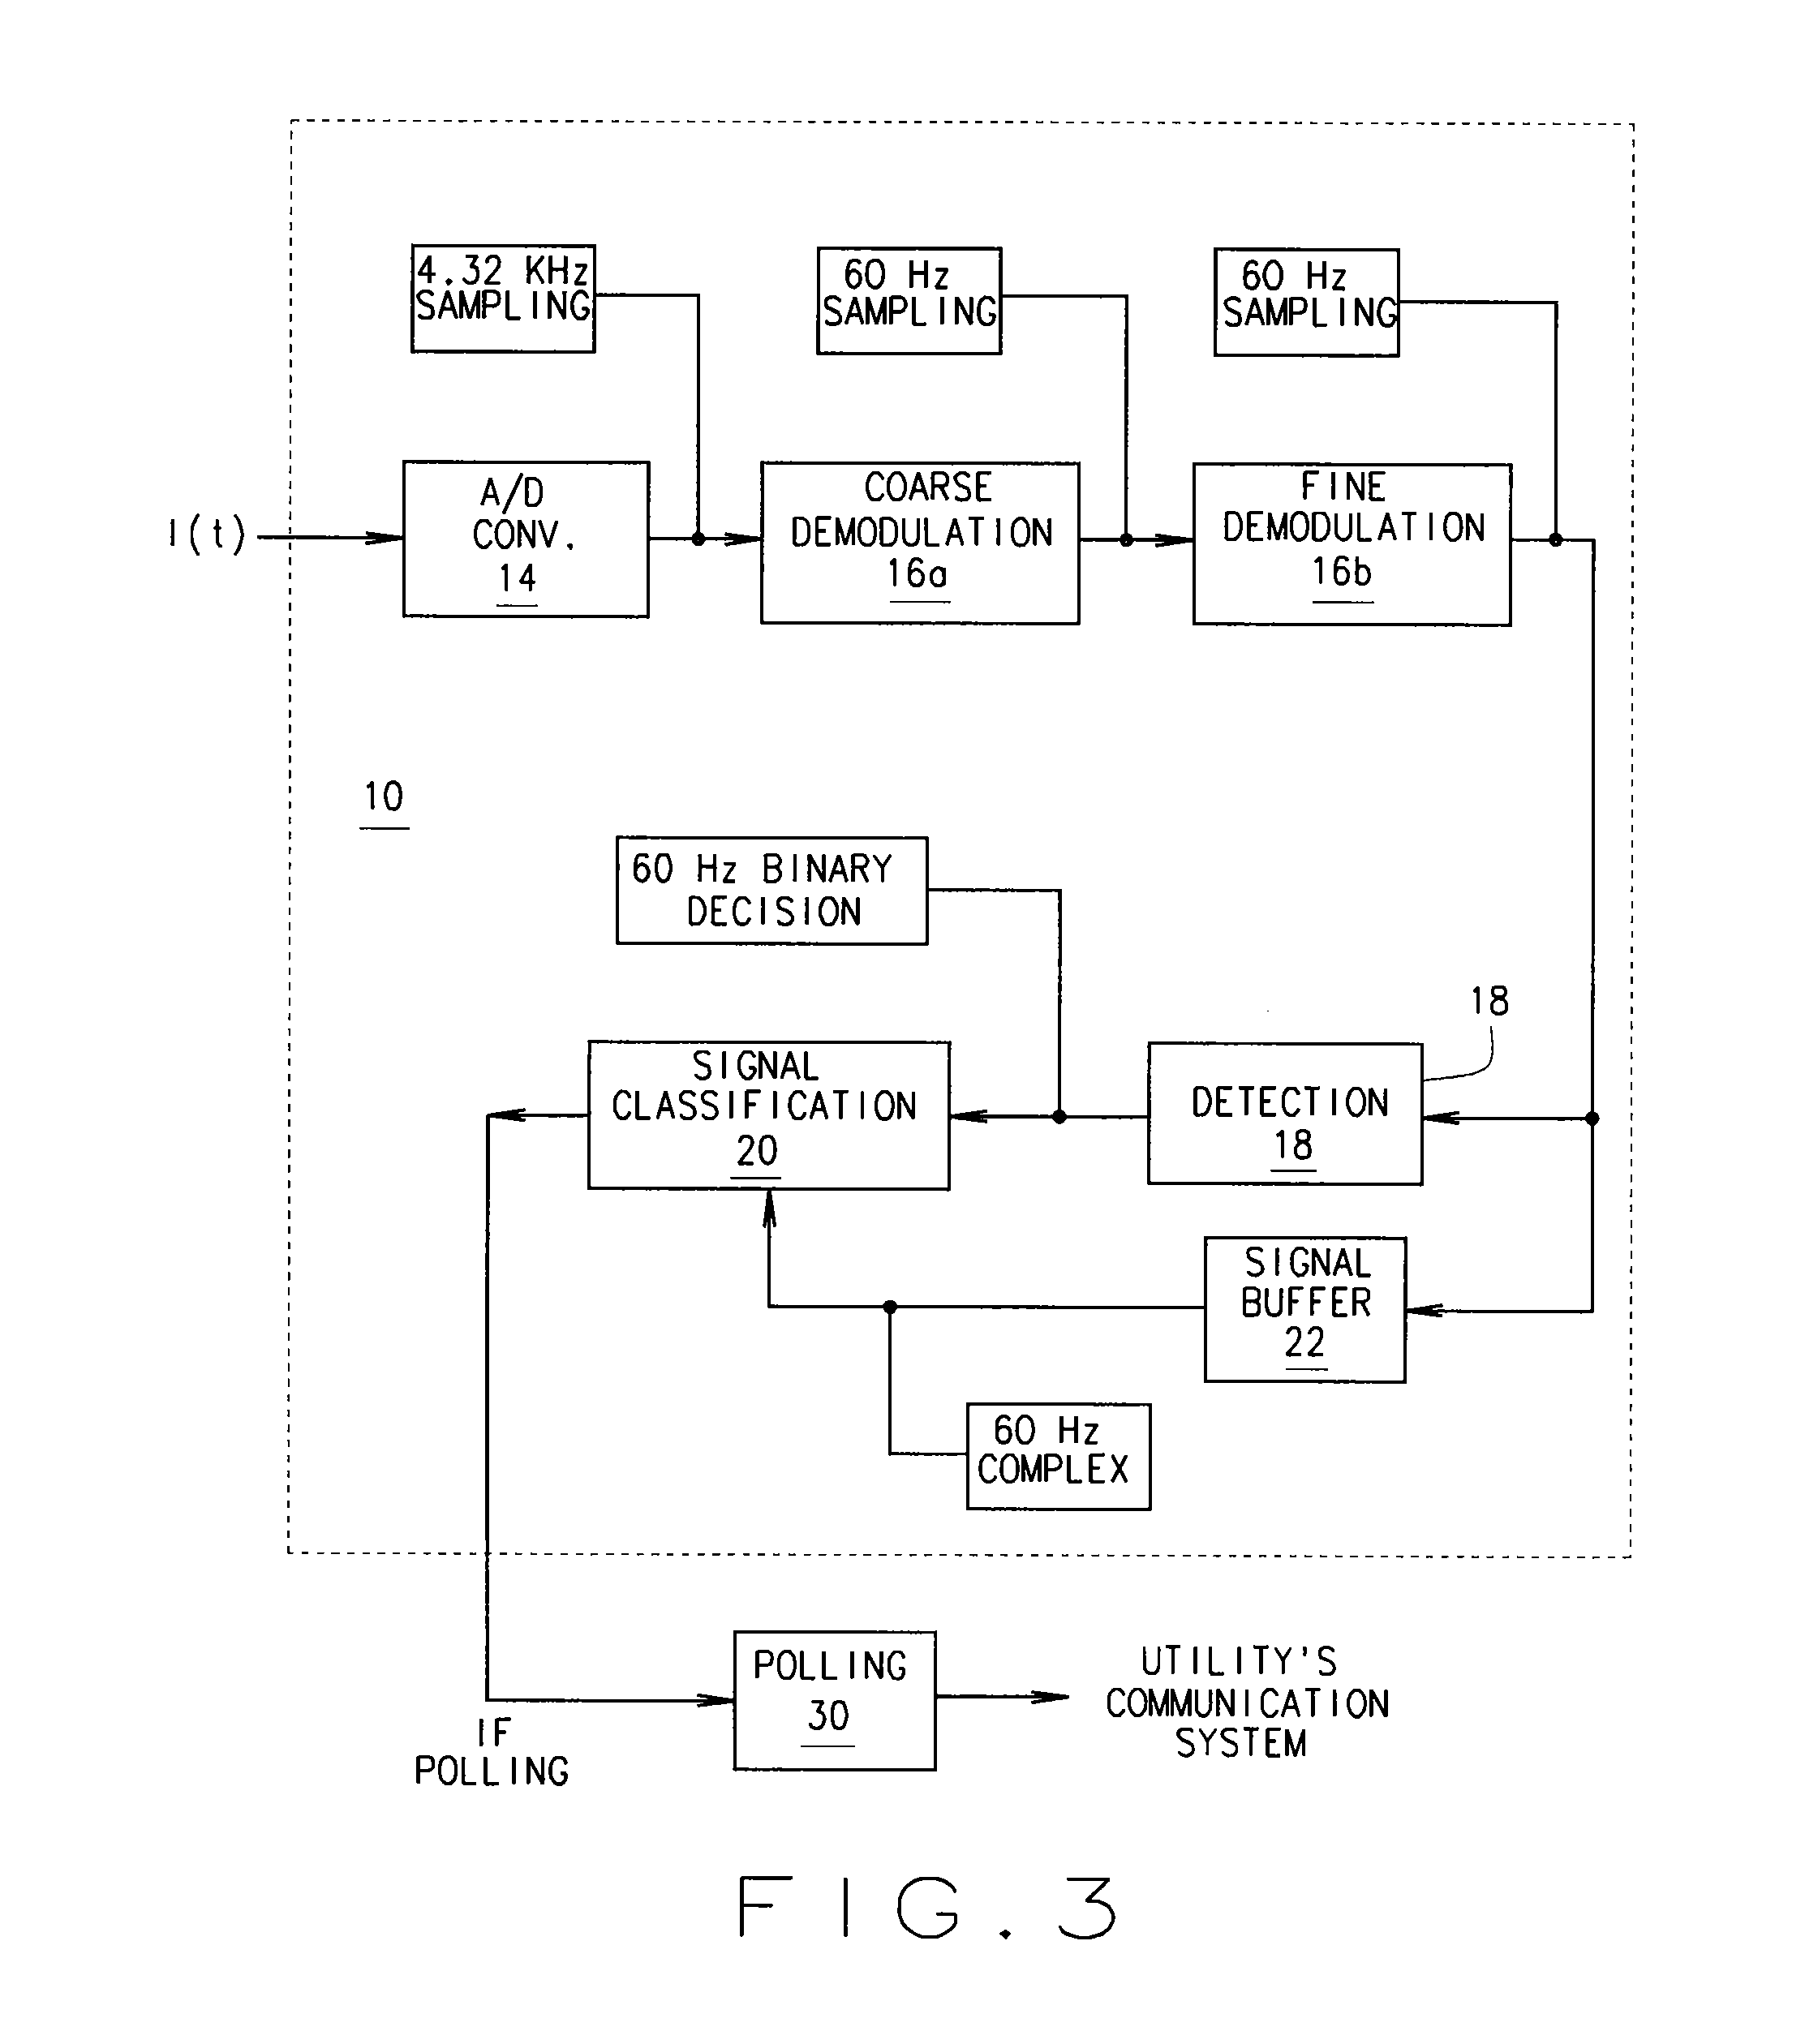 Transient detector and fault classifier for a power distribution system